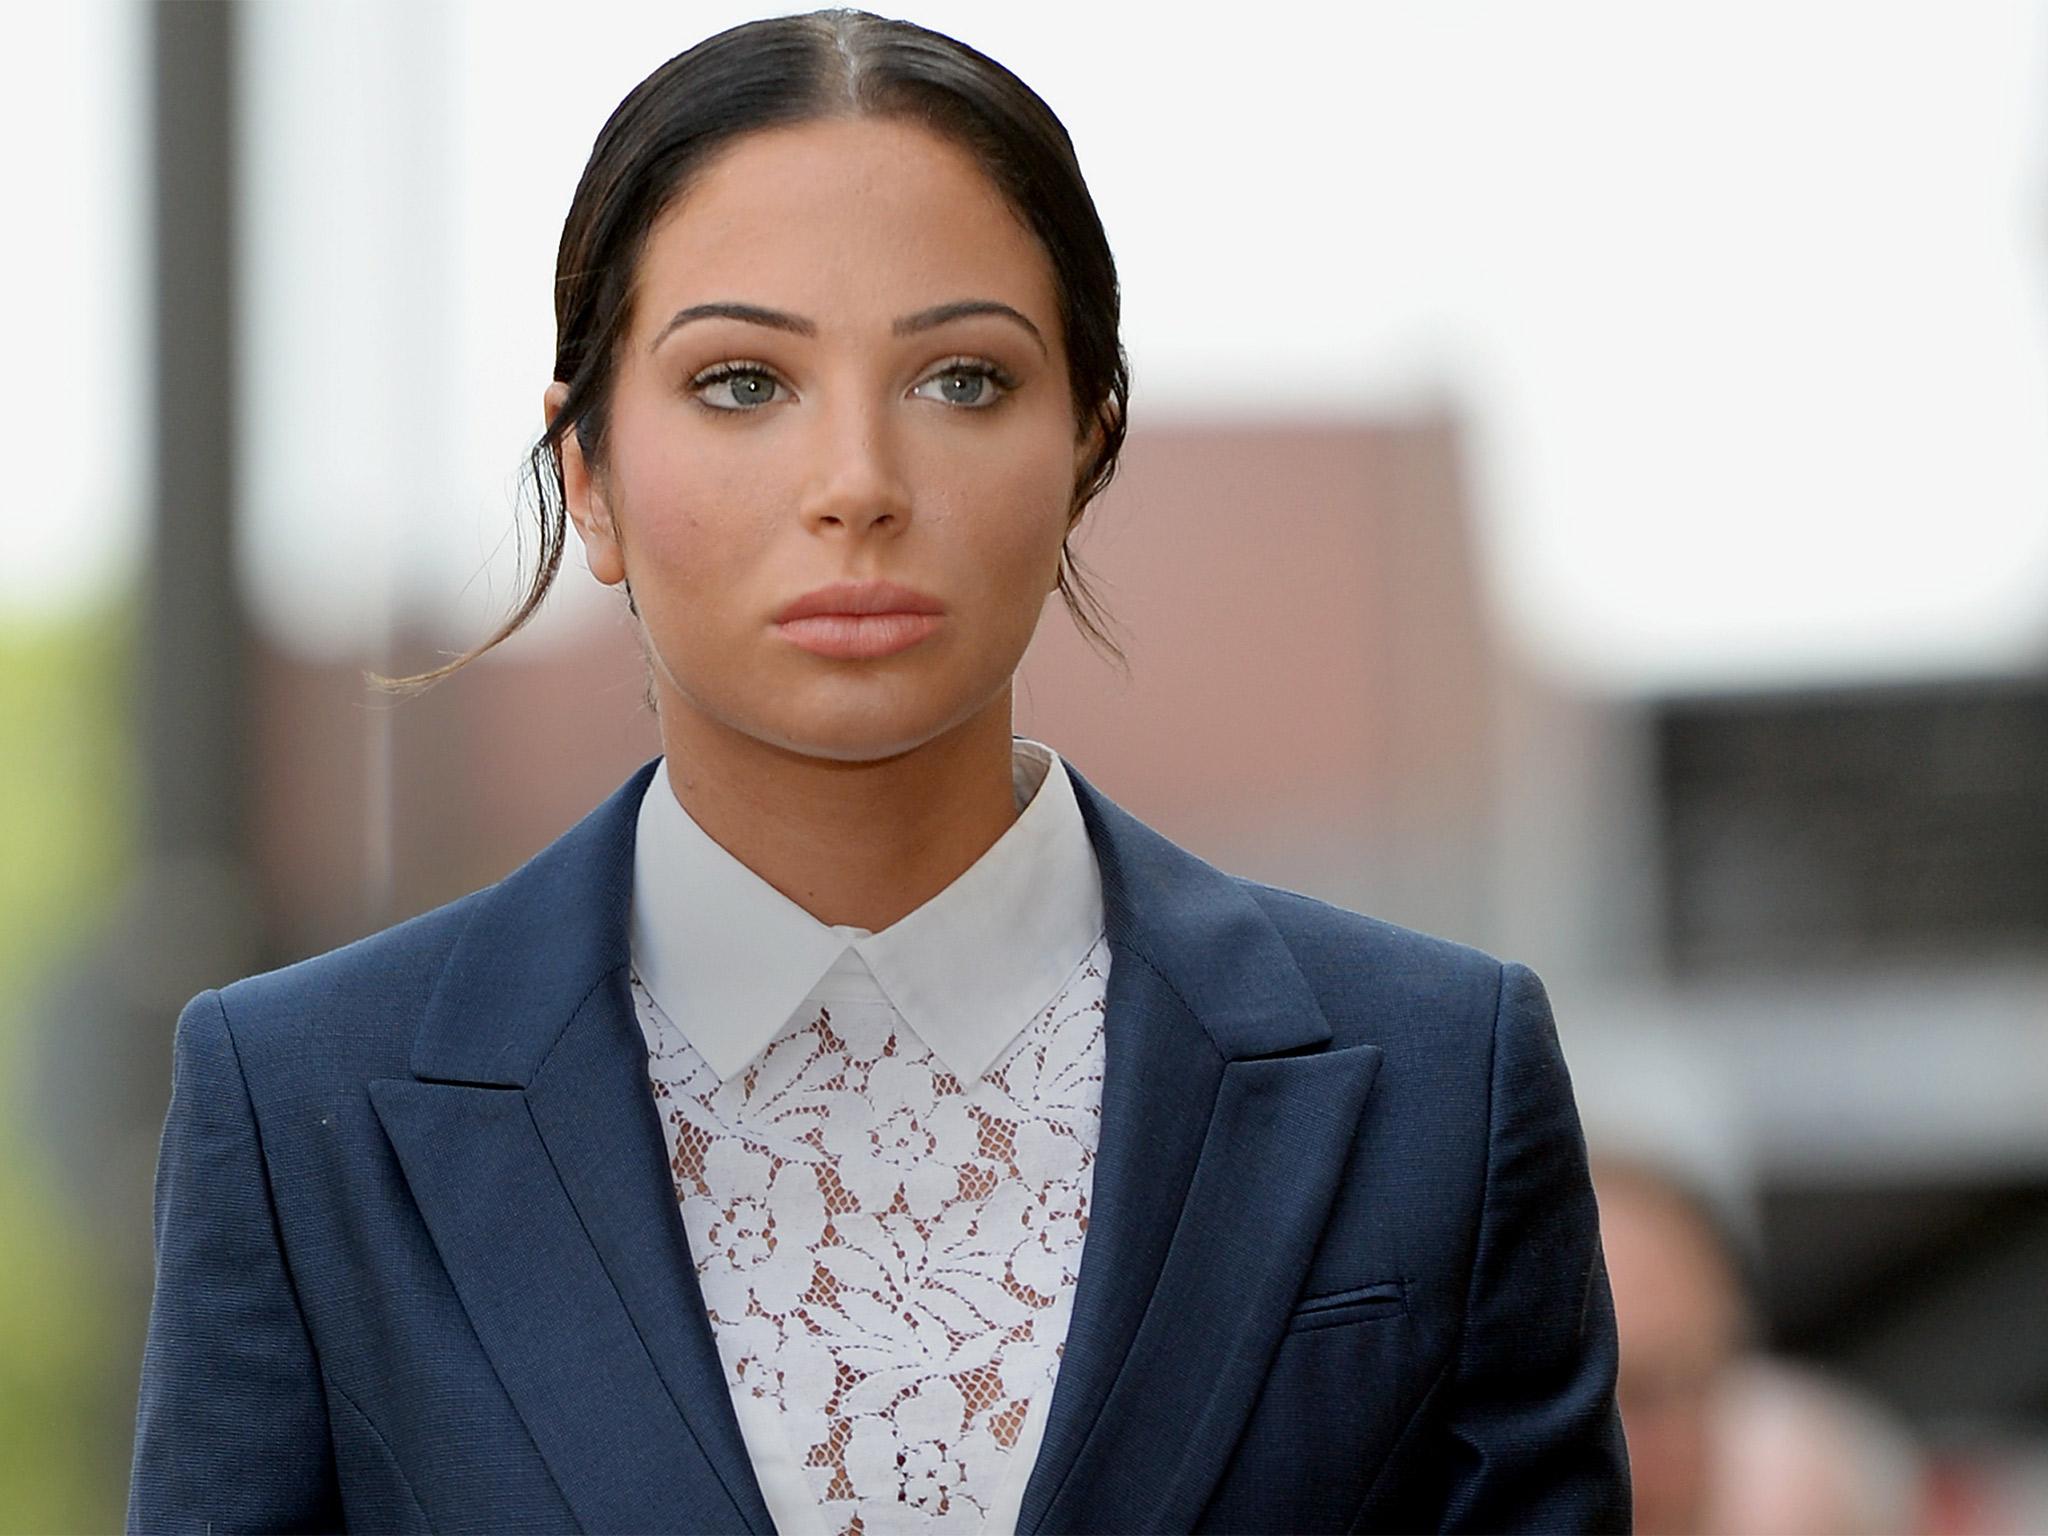 Tulisa Contostavlos' trial collapsed earlier this year